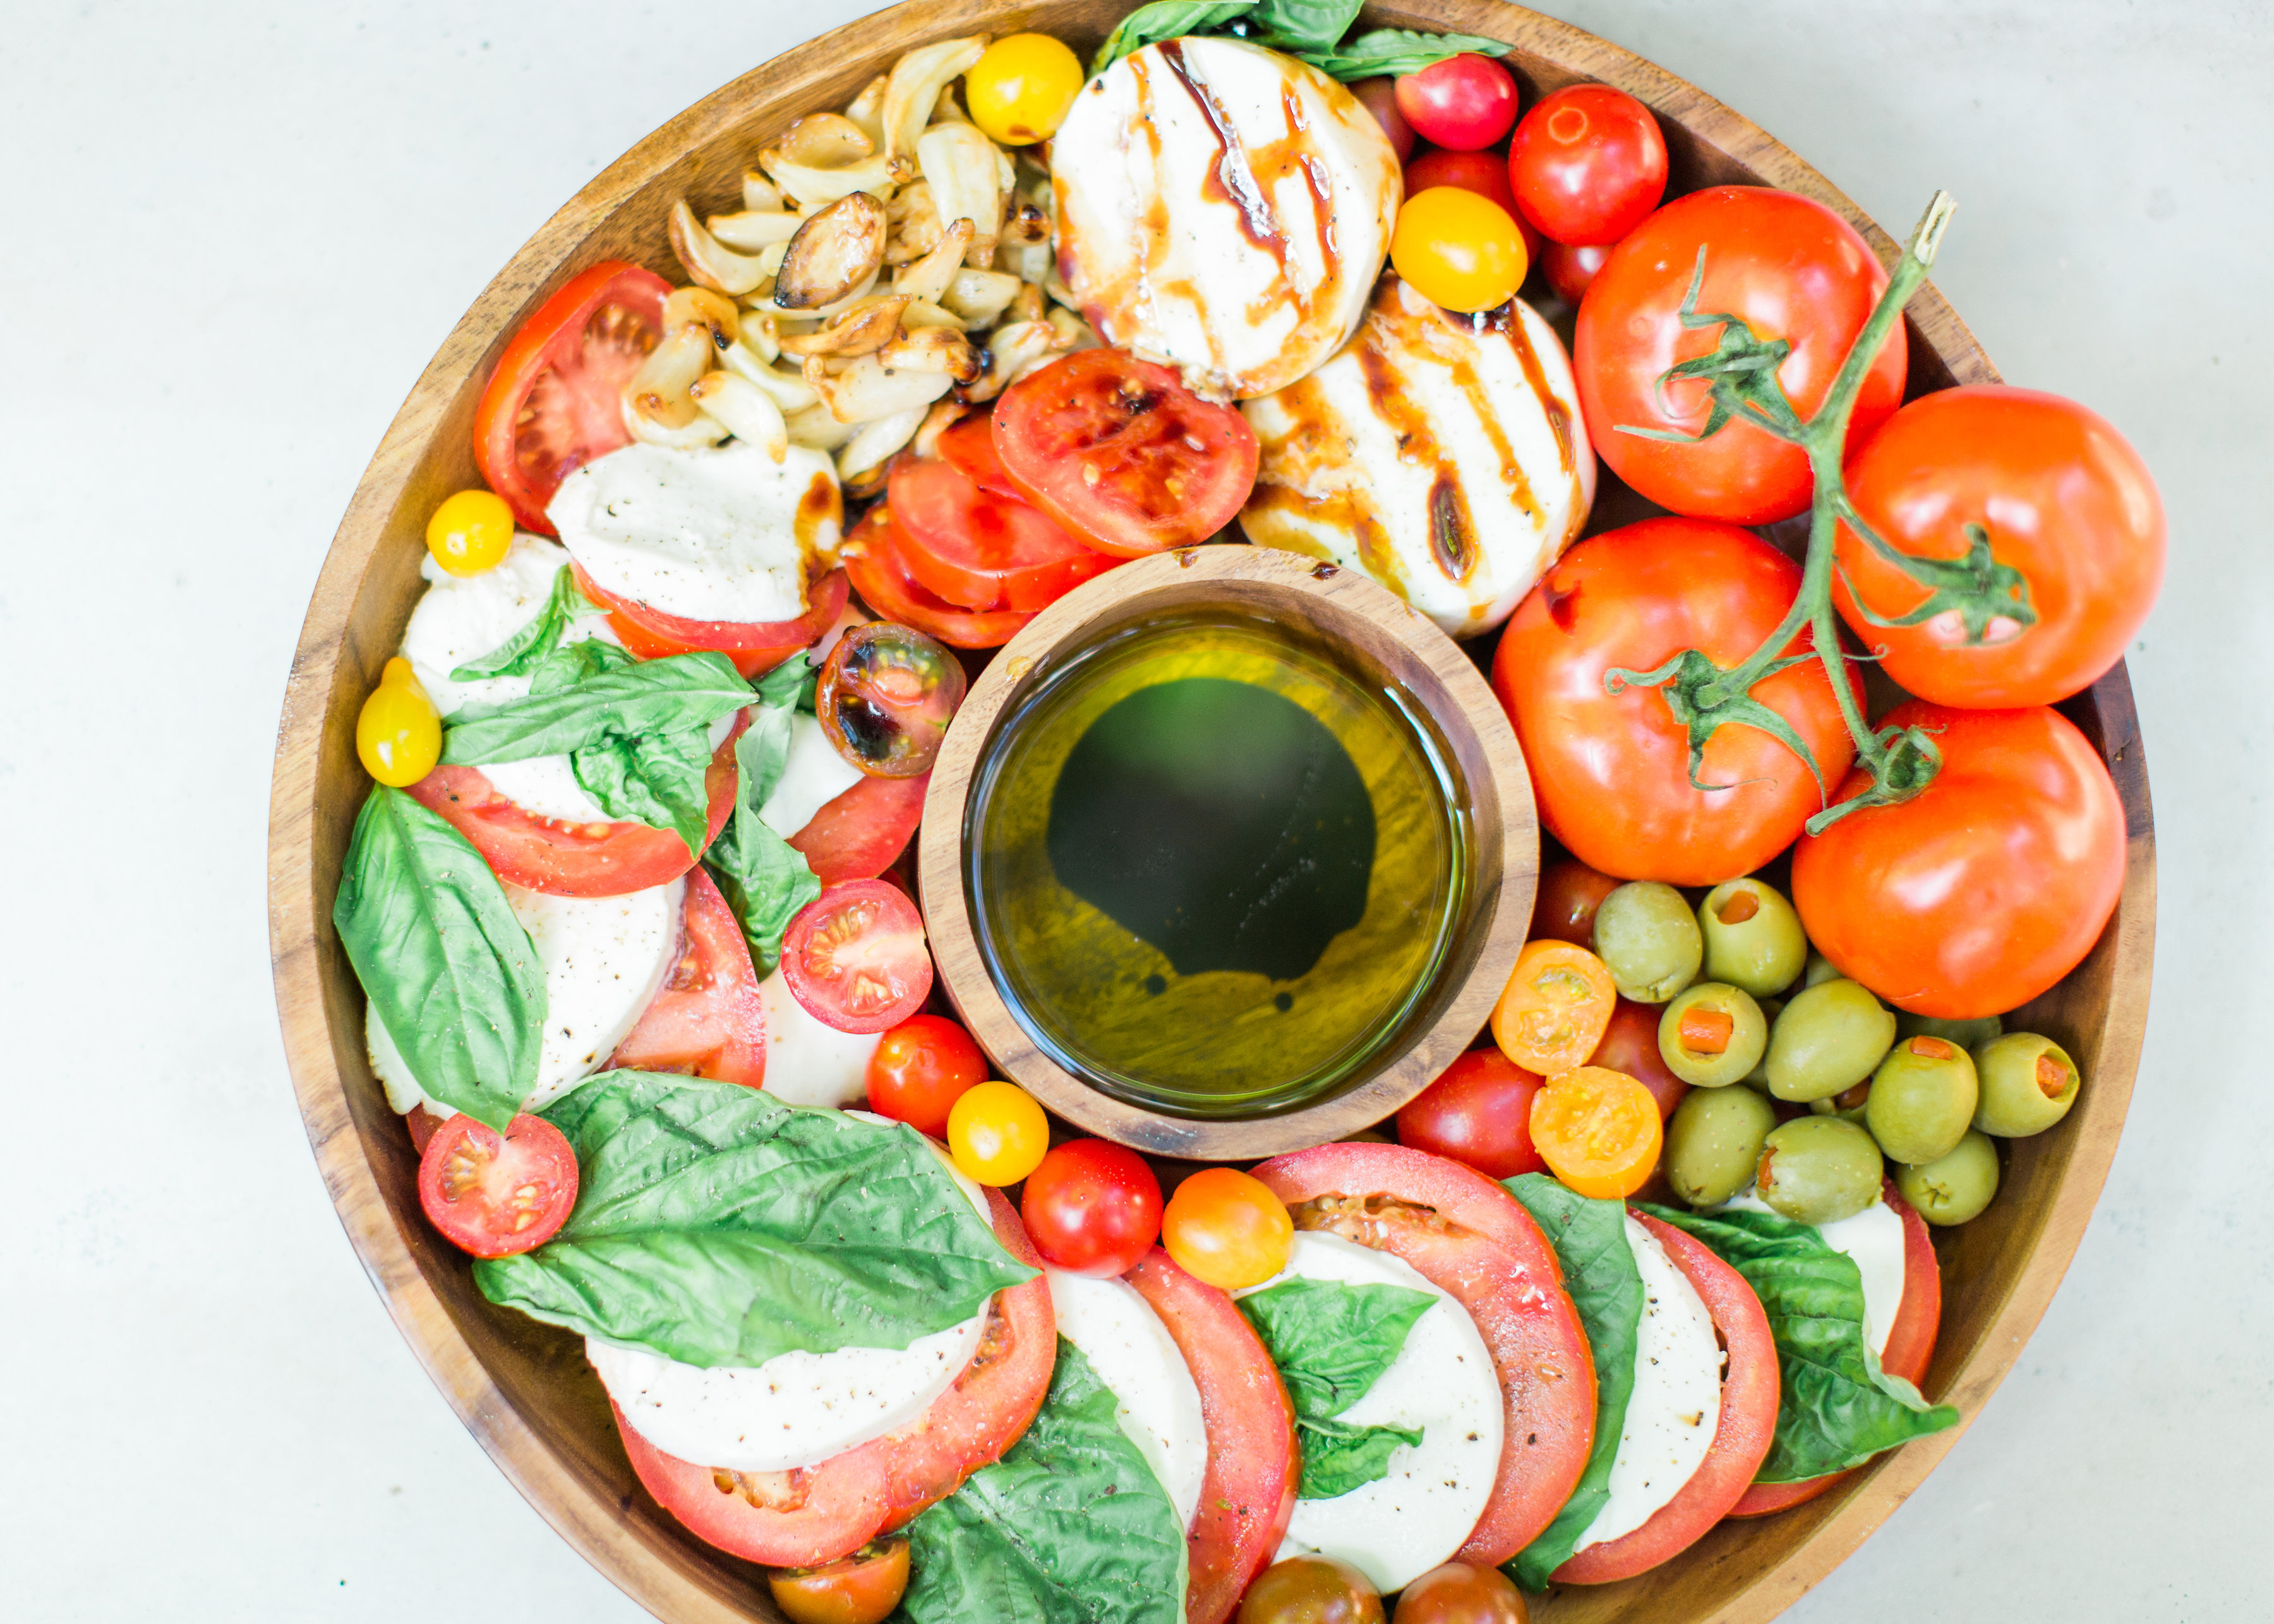 Tomatoes, fresh mozzarella, and basil drizzled with balsamic vinegar, or a sweet balsamic reduction, and olive oil; a caprese salad platter is so easy to make, looks beautiful and impressive (hello, wow factor!), and the magical combination of flavors is totally delicious. Click through for the recipe. #caprese #capresesalad #capresesaladplatter #appetizer #salad #partyfood #recipe #capreserecipe | glitterinc.com | @glitterinc